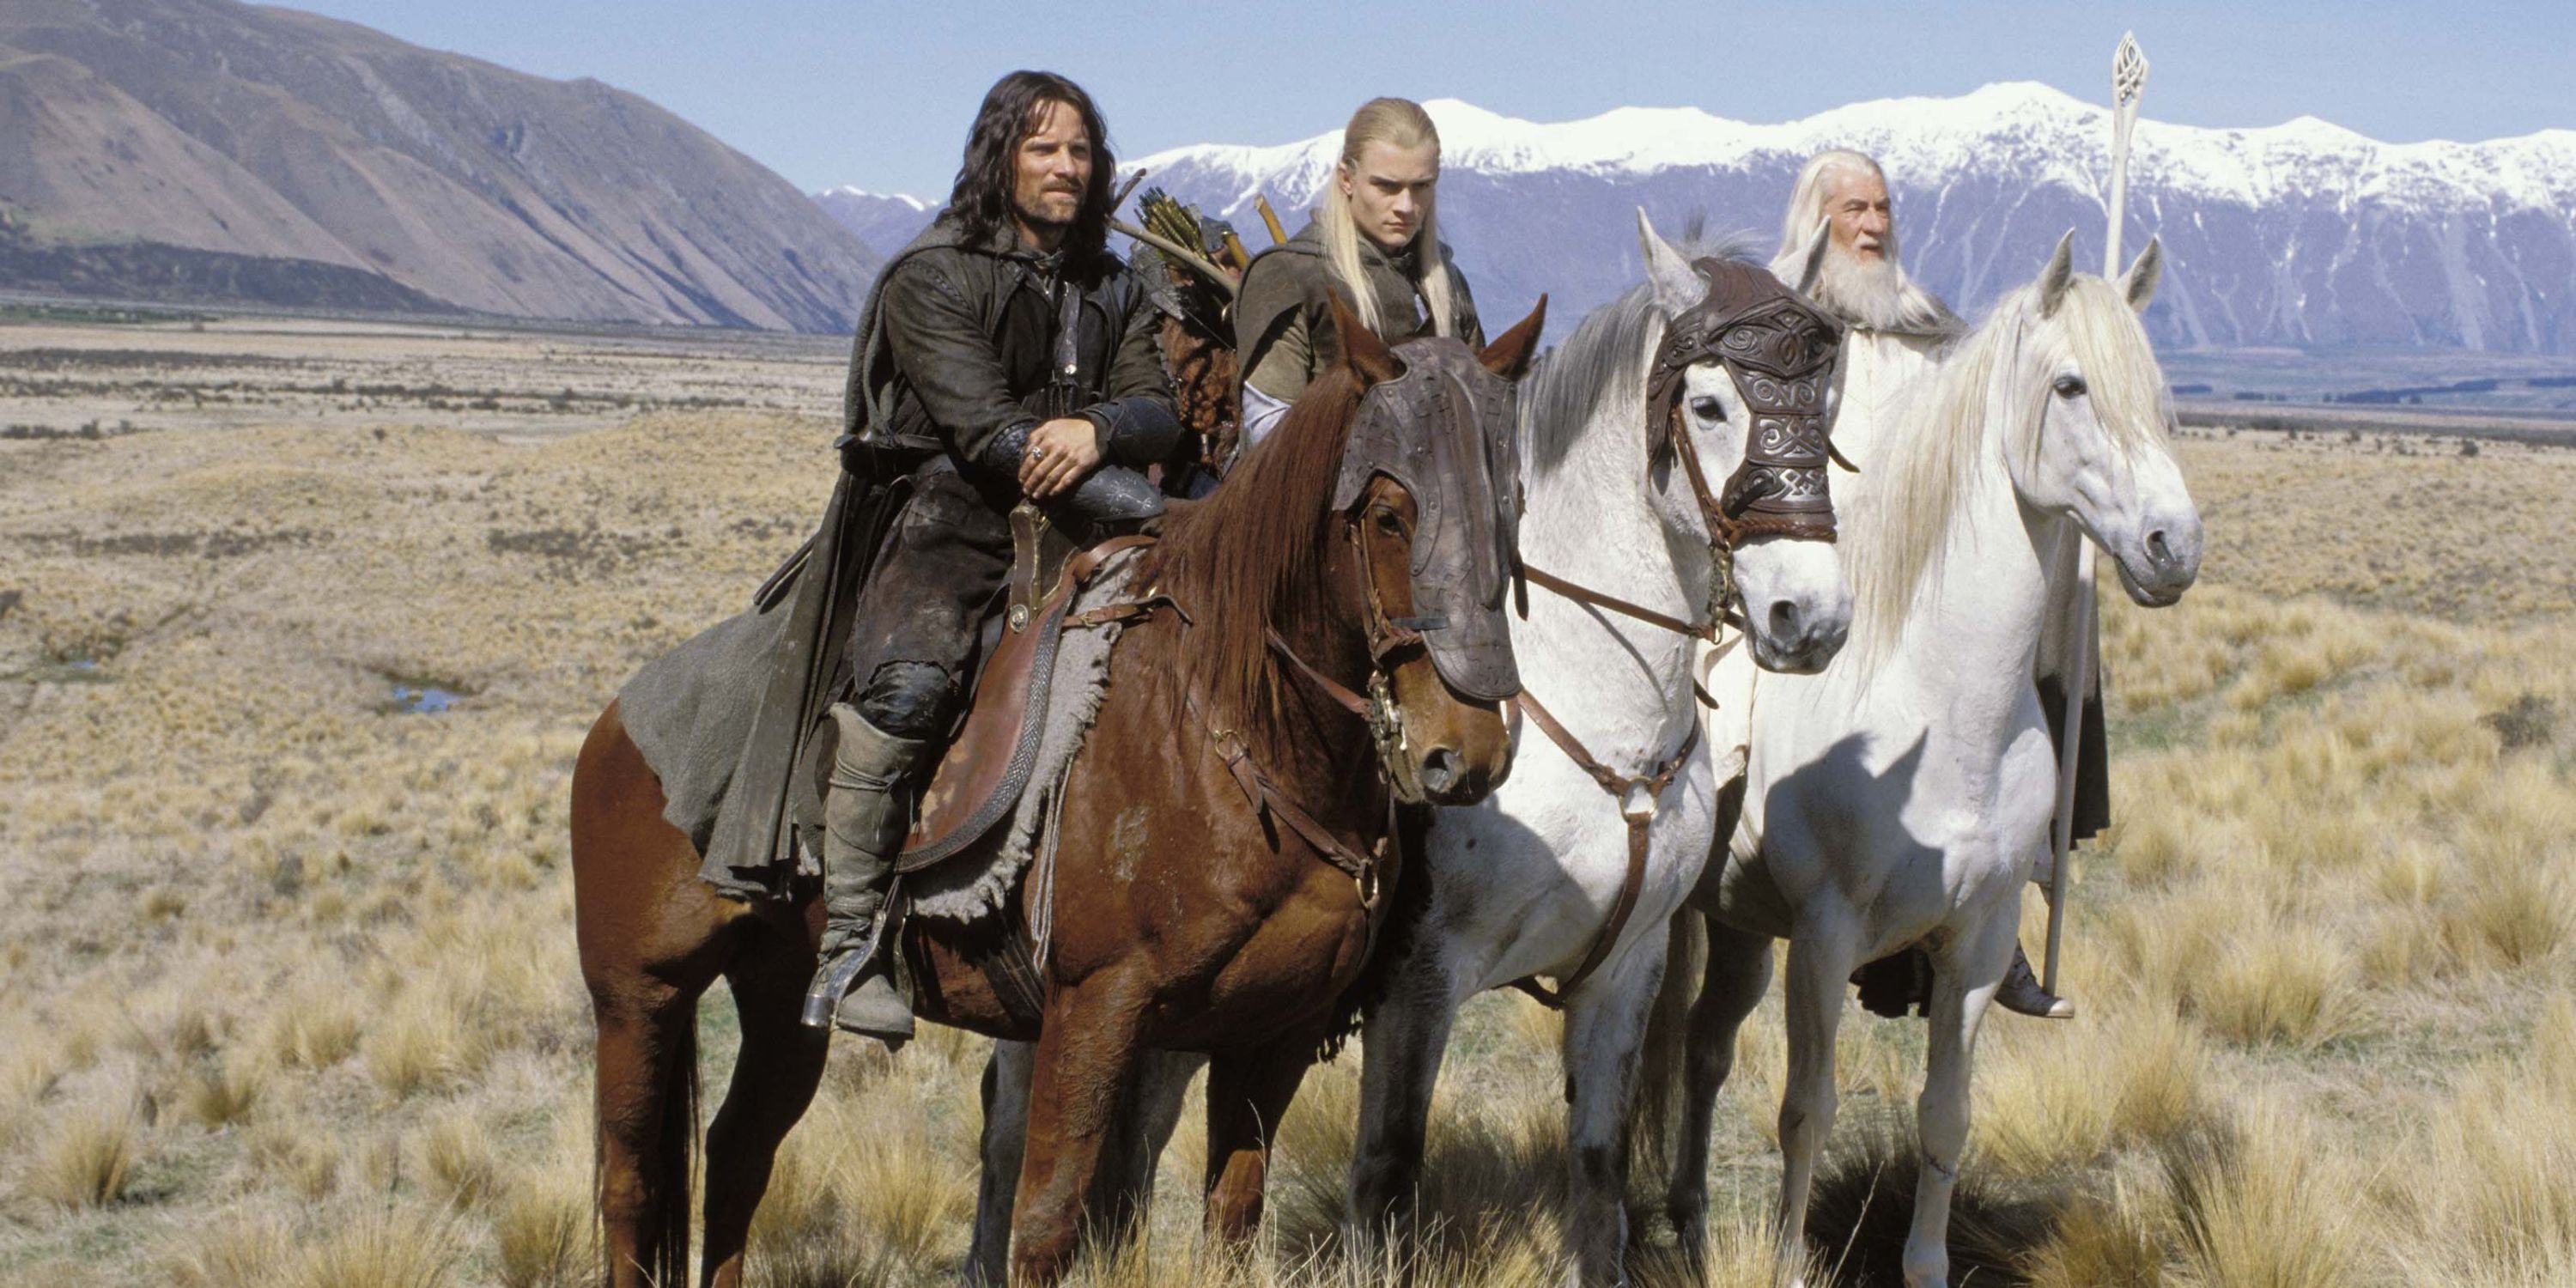 Gandalf riding Shadowfax beside Aragorn and Legolas in The Two Towers